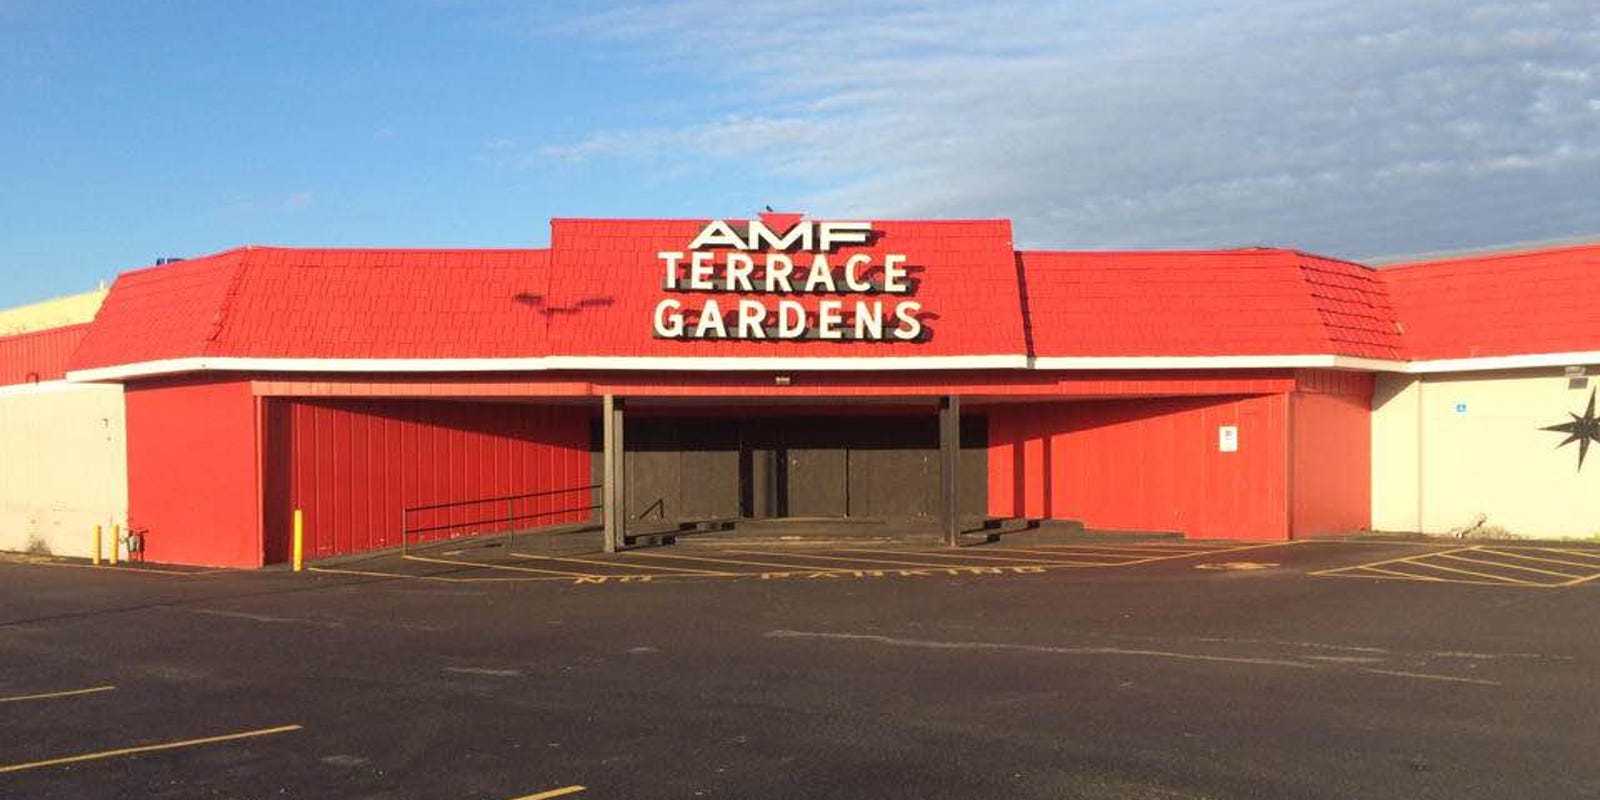 Terrace Garden Lanes Rochester S Second Largest Bowling Alley Closes